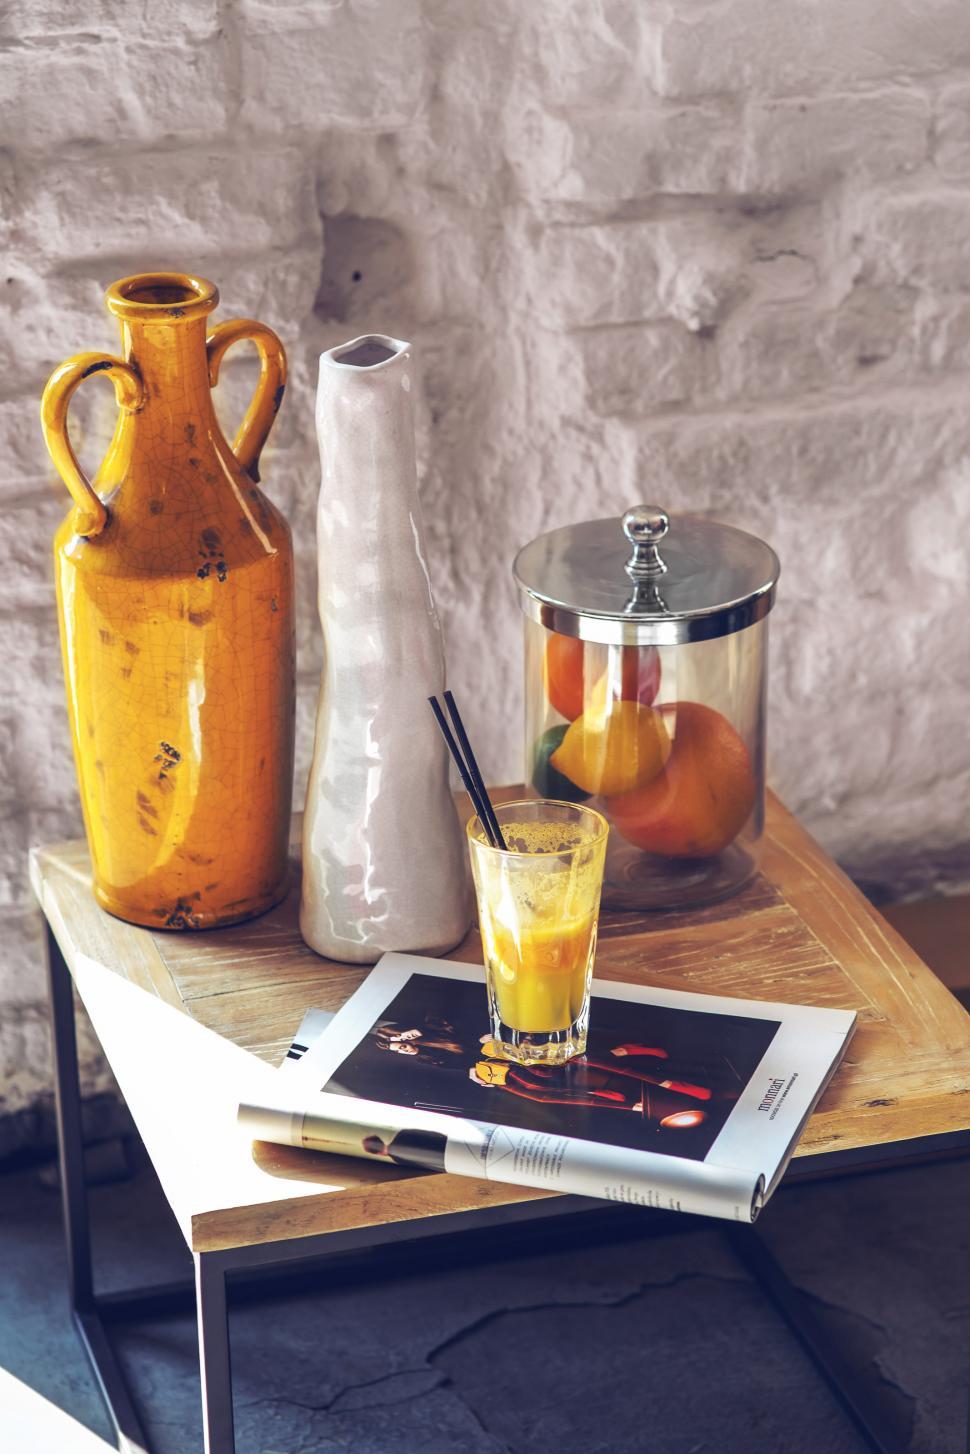 Free Image of Wooden Table With Glass of Orange Juice 